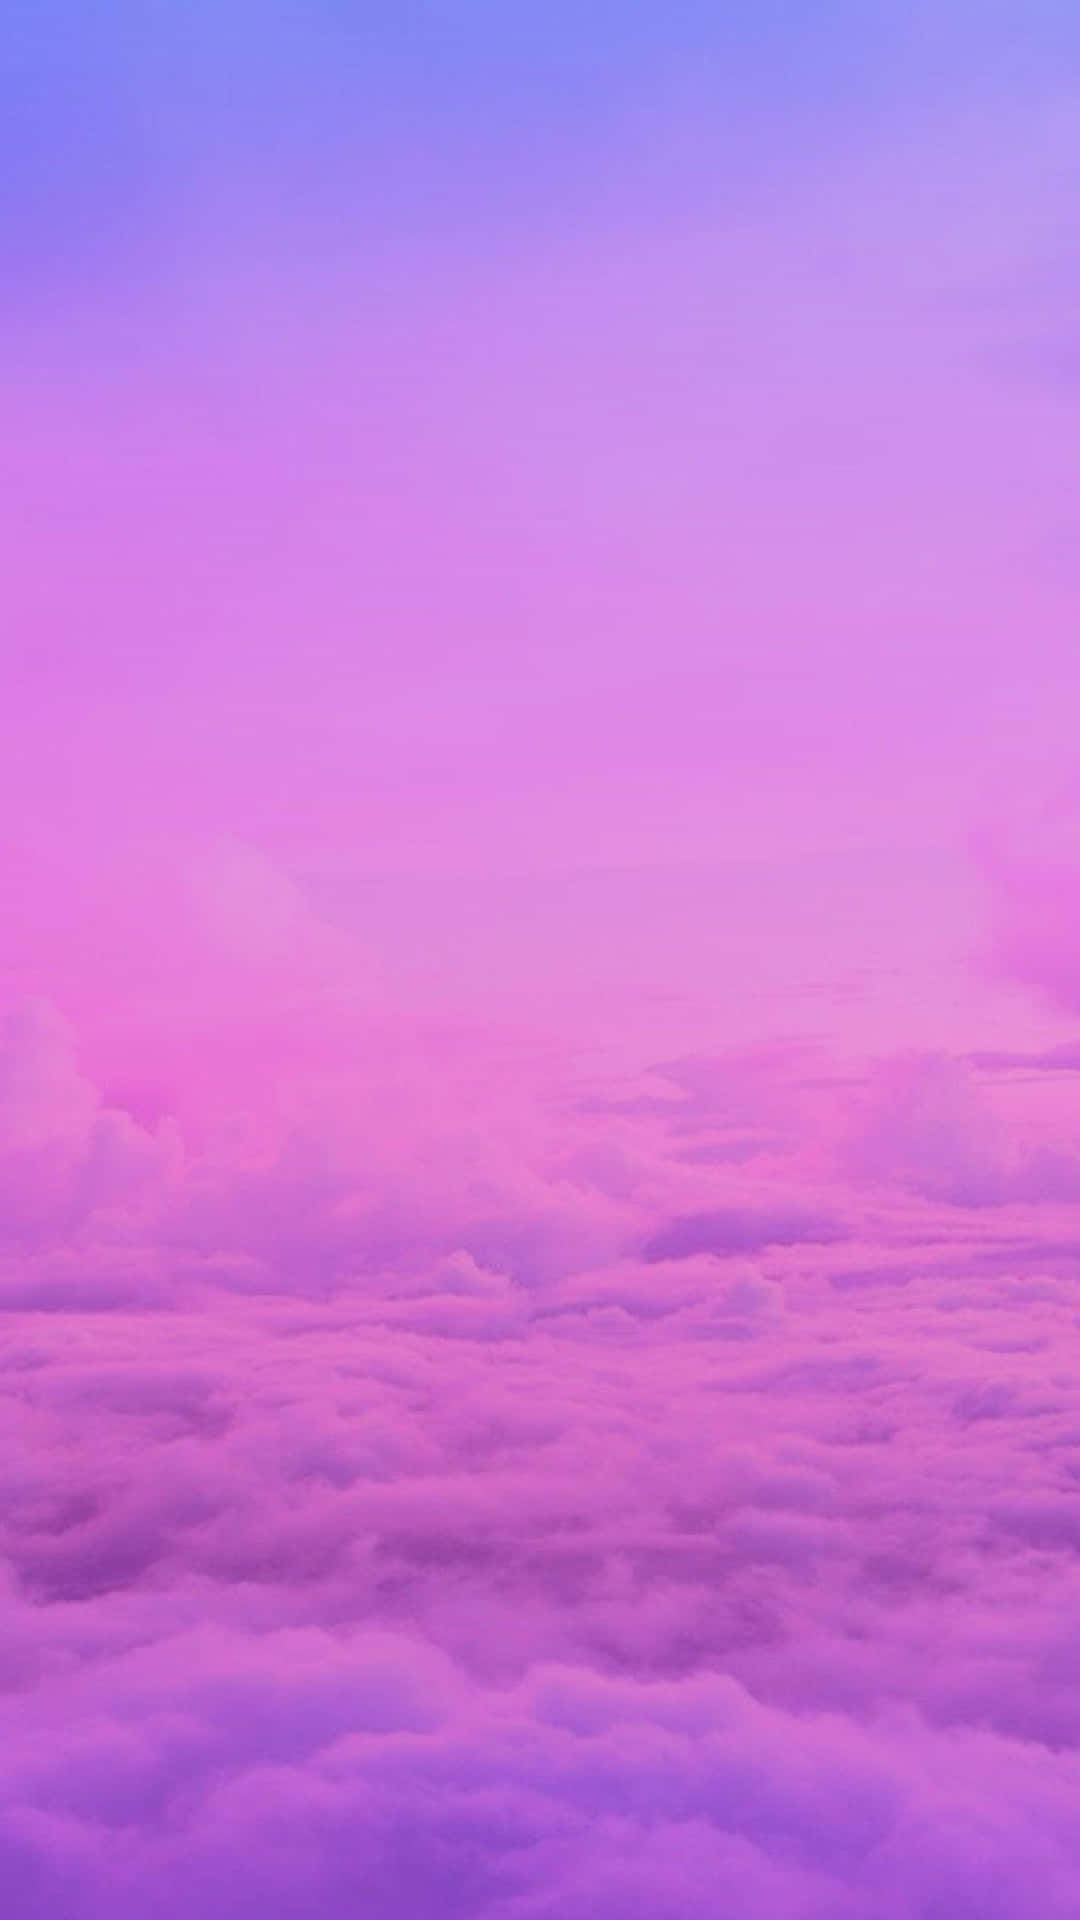 Download A vivid combination of pink and blue | Wallpapers.com